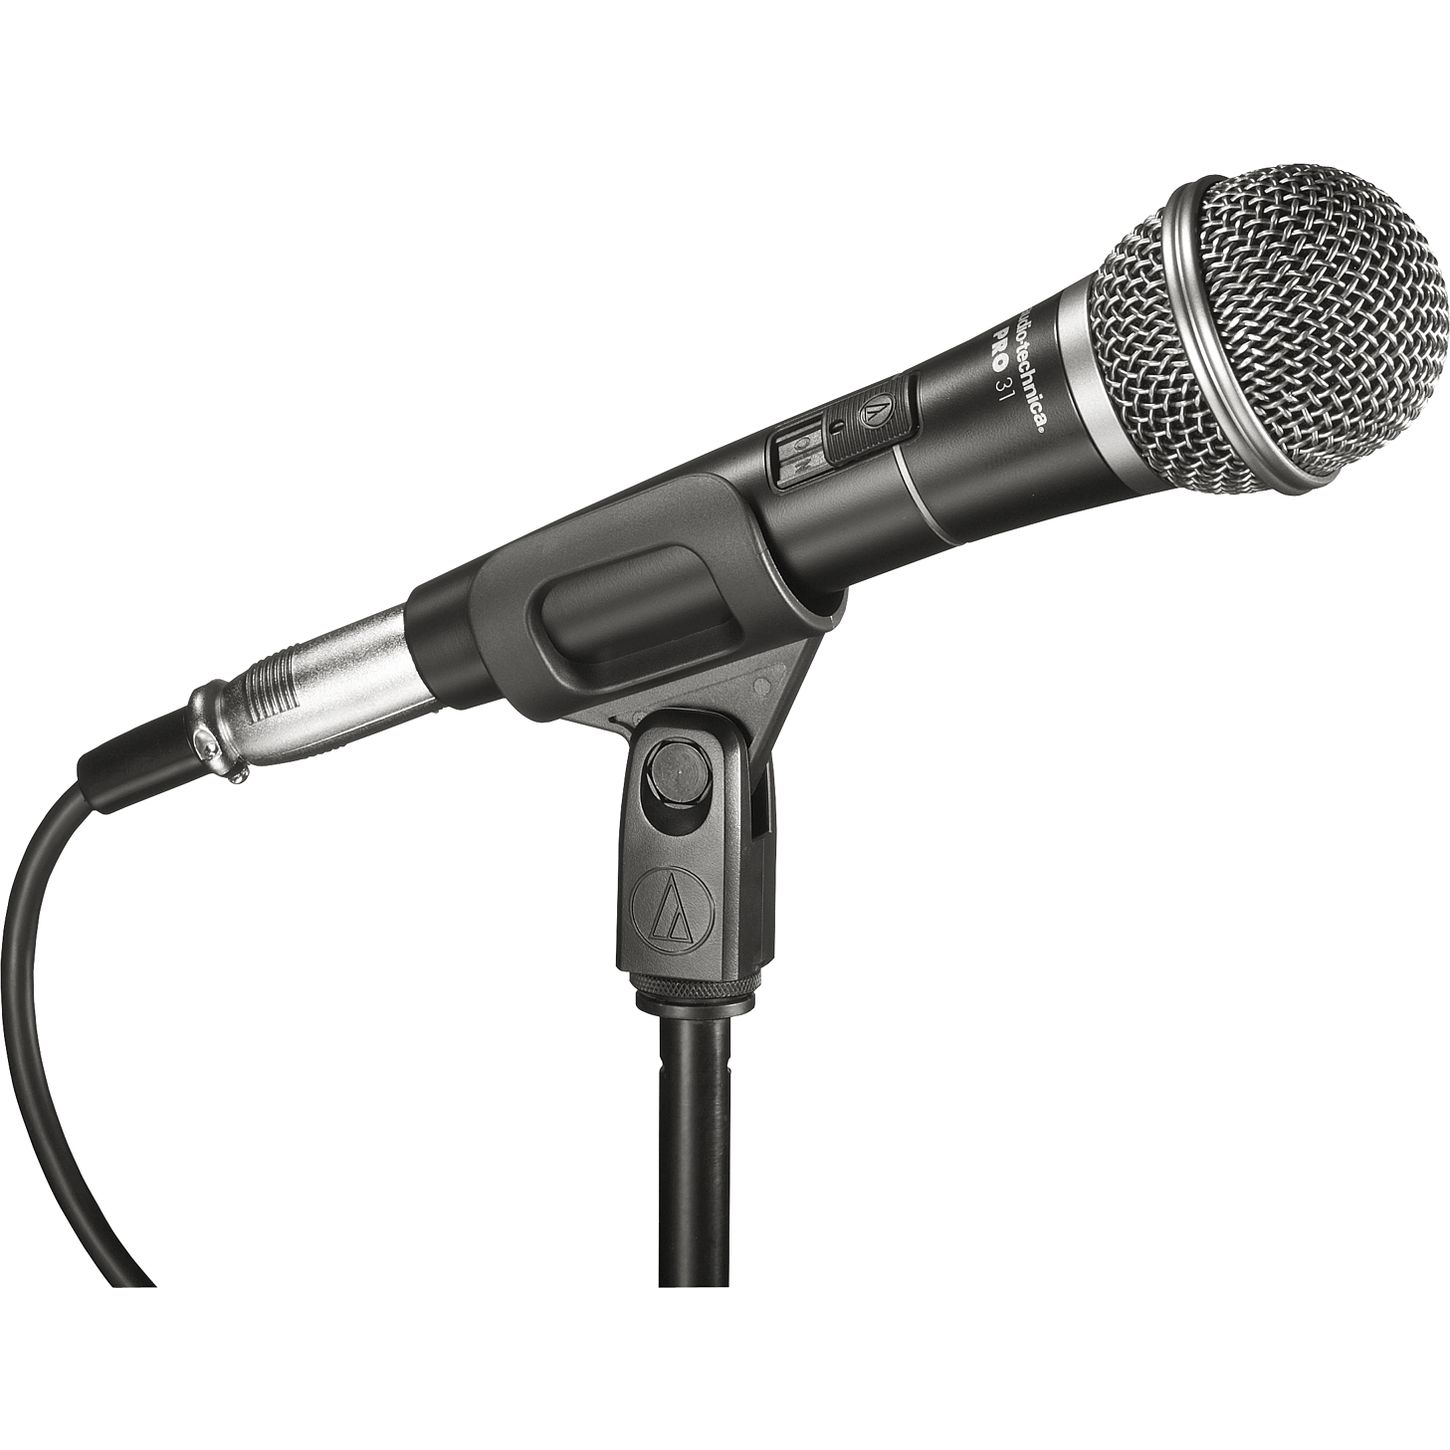 Best Microphone 2016 | Microphone Reviews